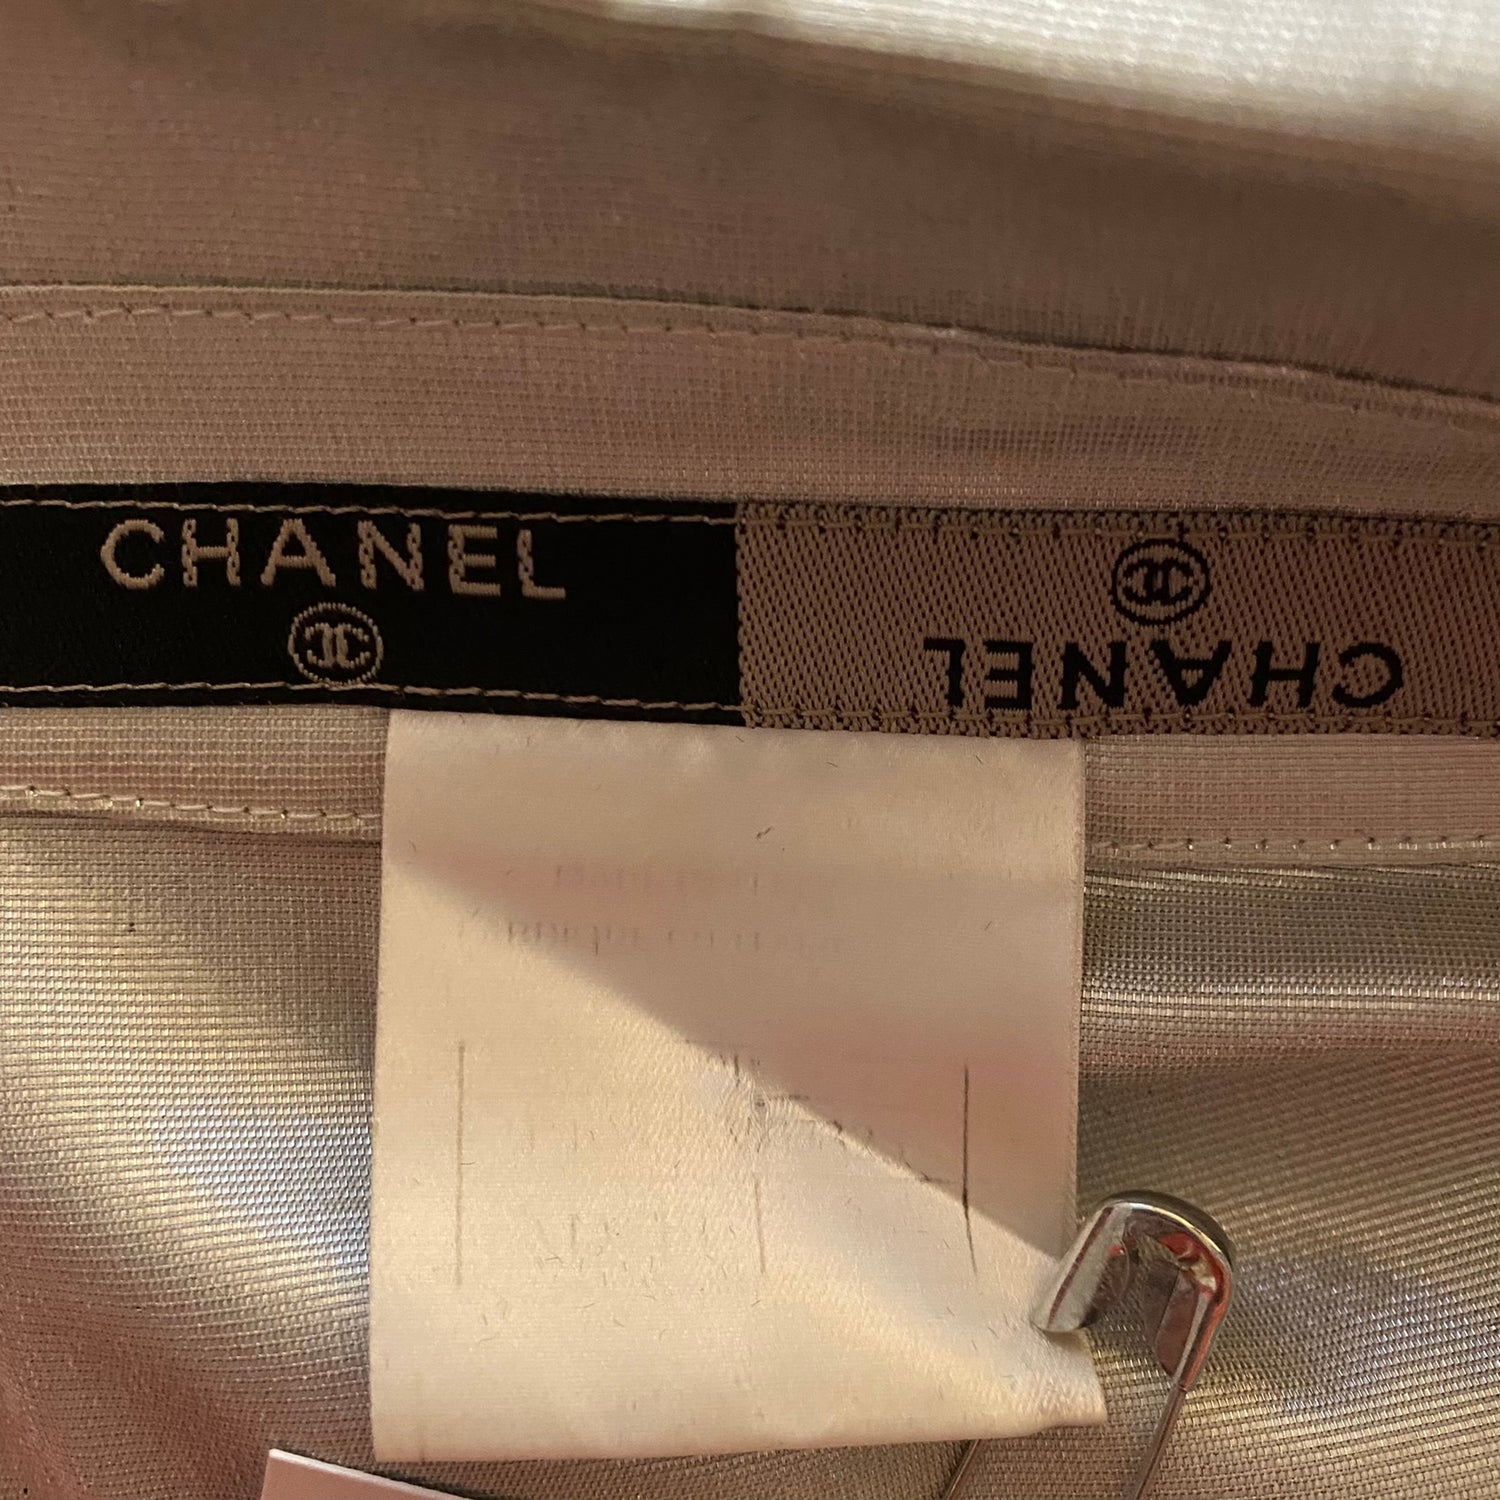 CHANEL Jackets vintage Lysis Paris pre-owned secondhand